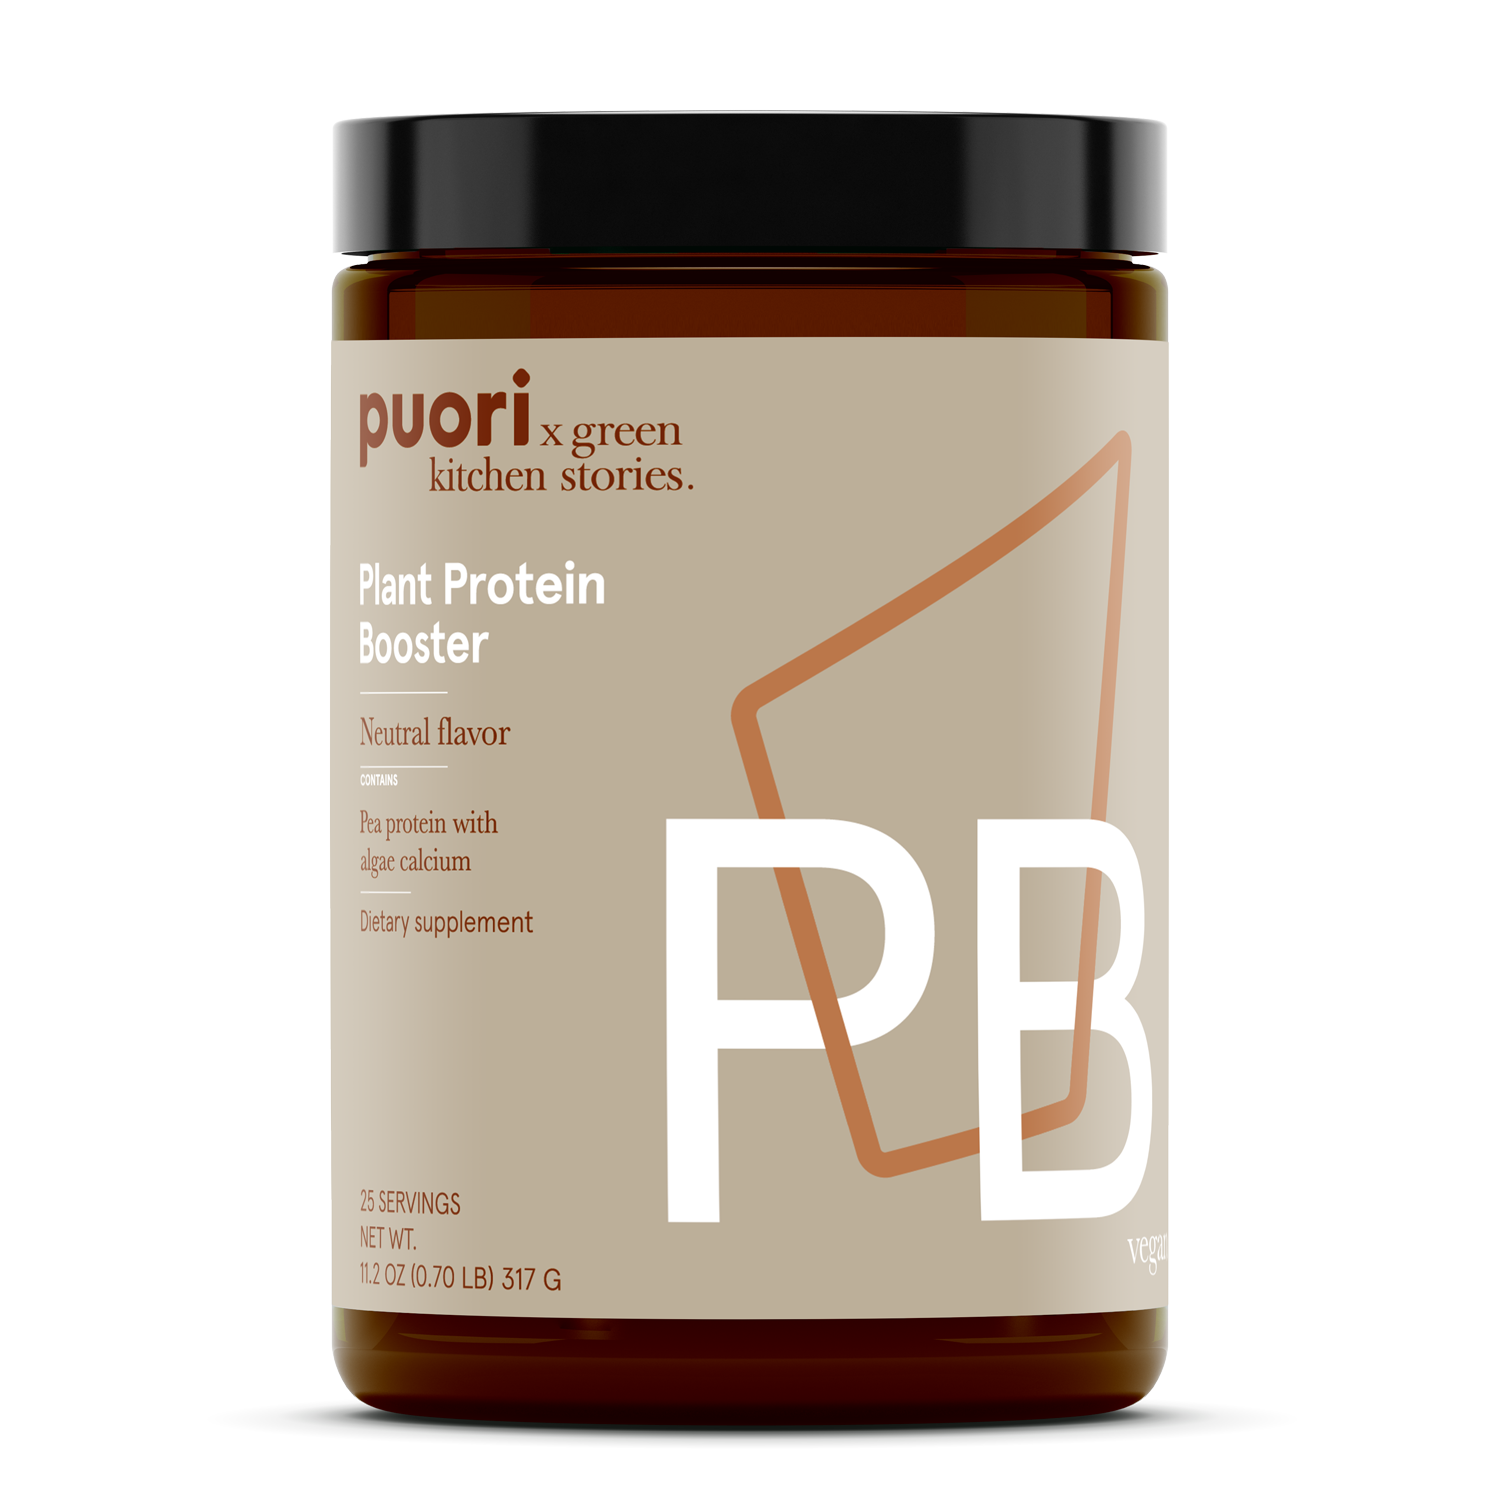 PB - Plant Protein Booster - 317g / 11.2oz